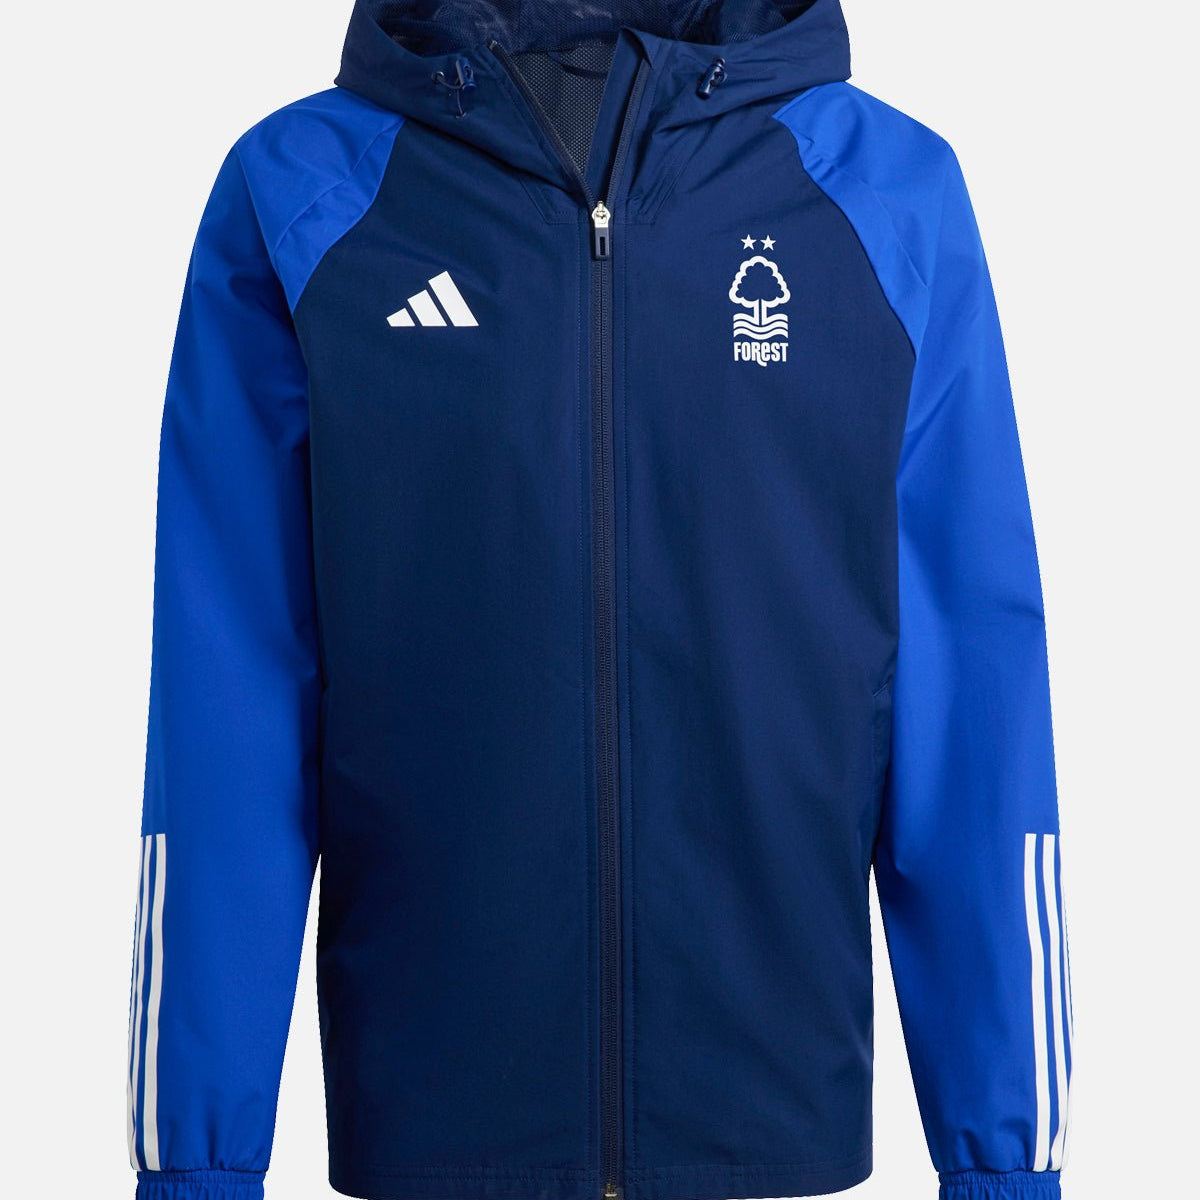 NFFC Junior Navy All Weather Training Jacket 23-24